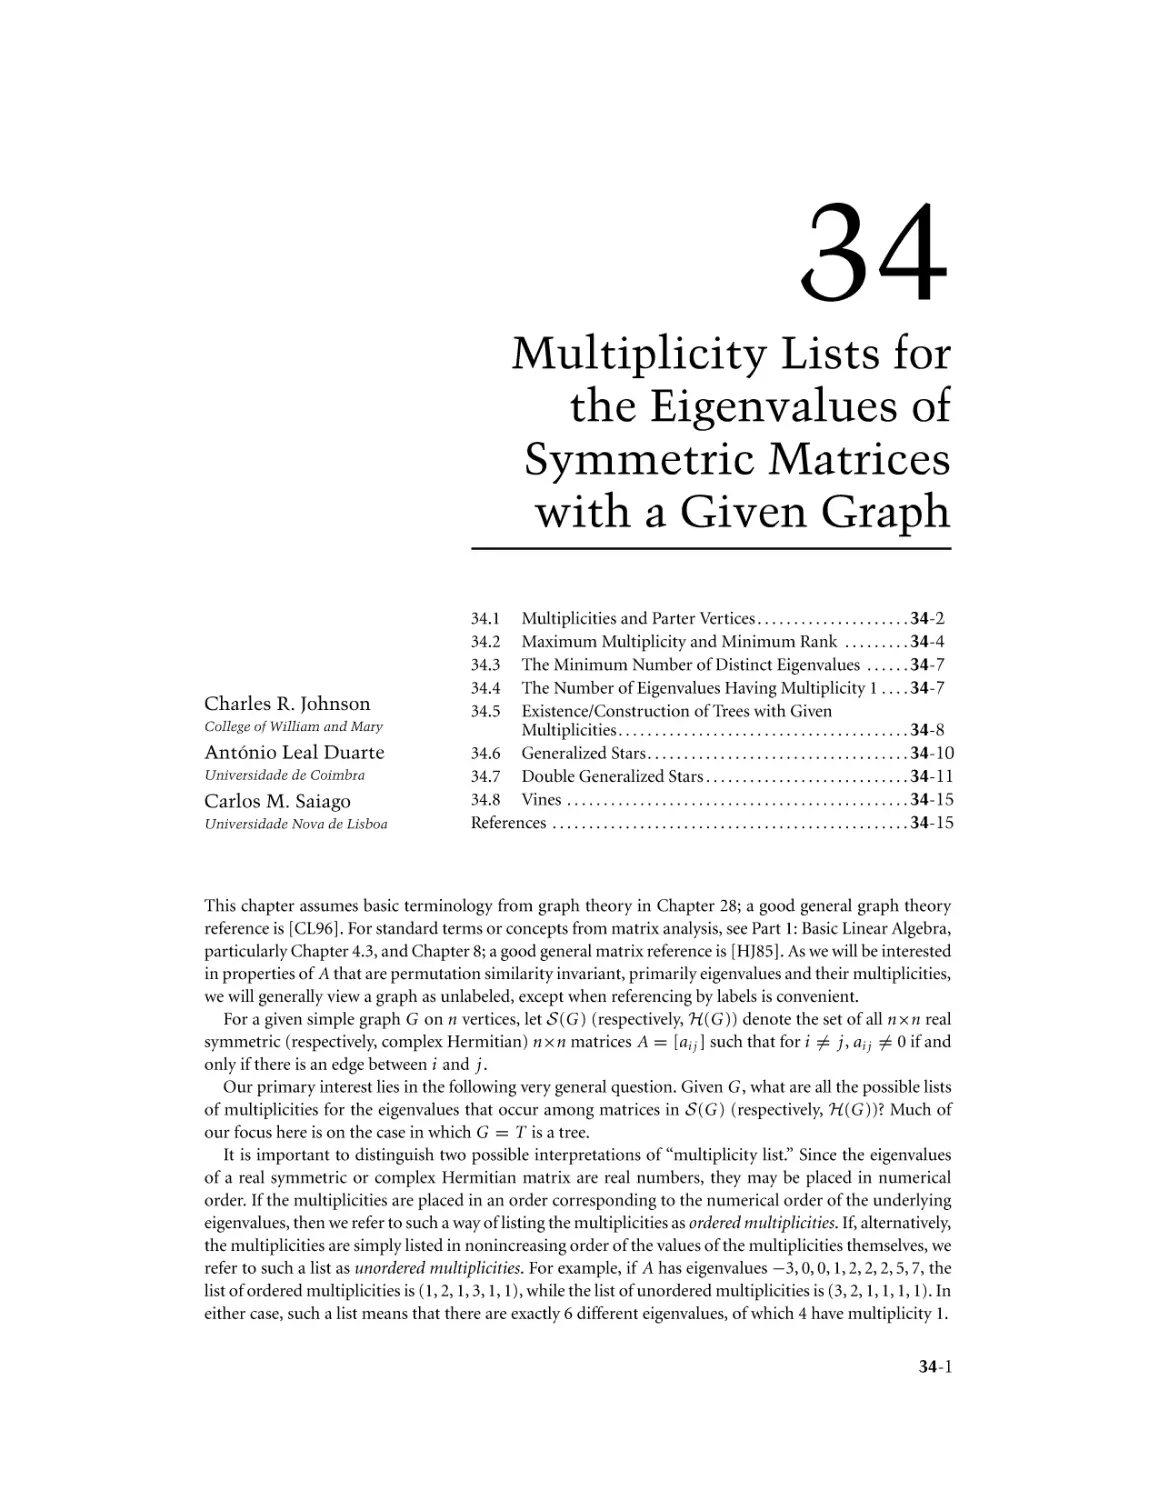 Chapter 34. Multiplicity Lists for the Eigenvalues of Symmetric Matrices with a Given Graph